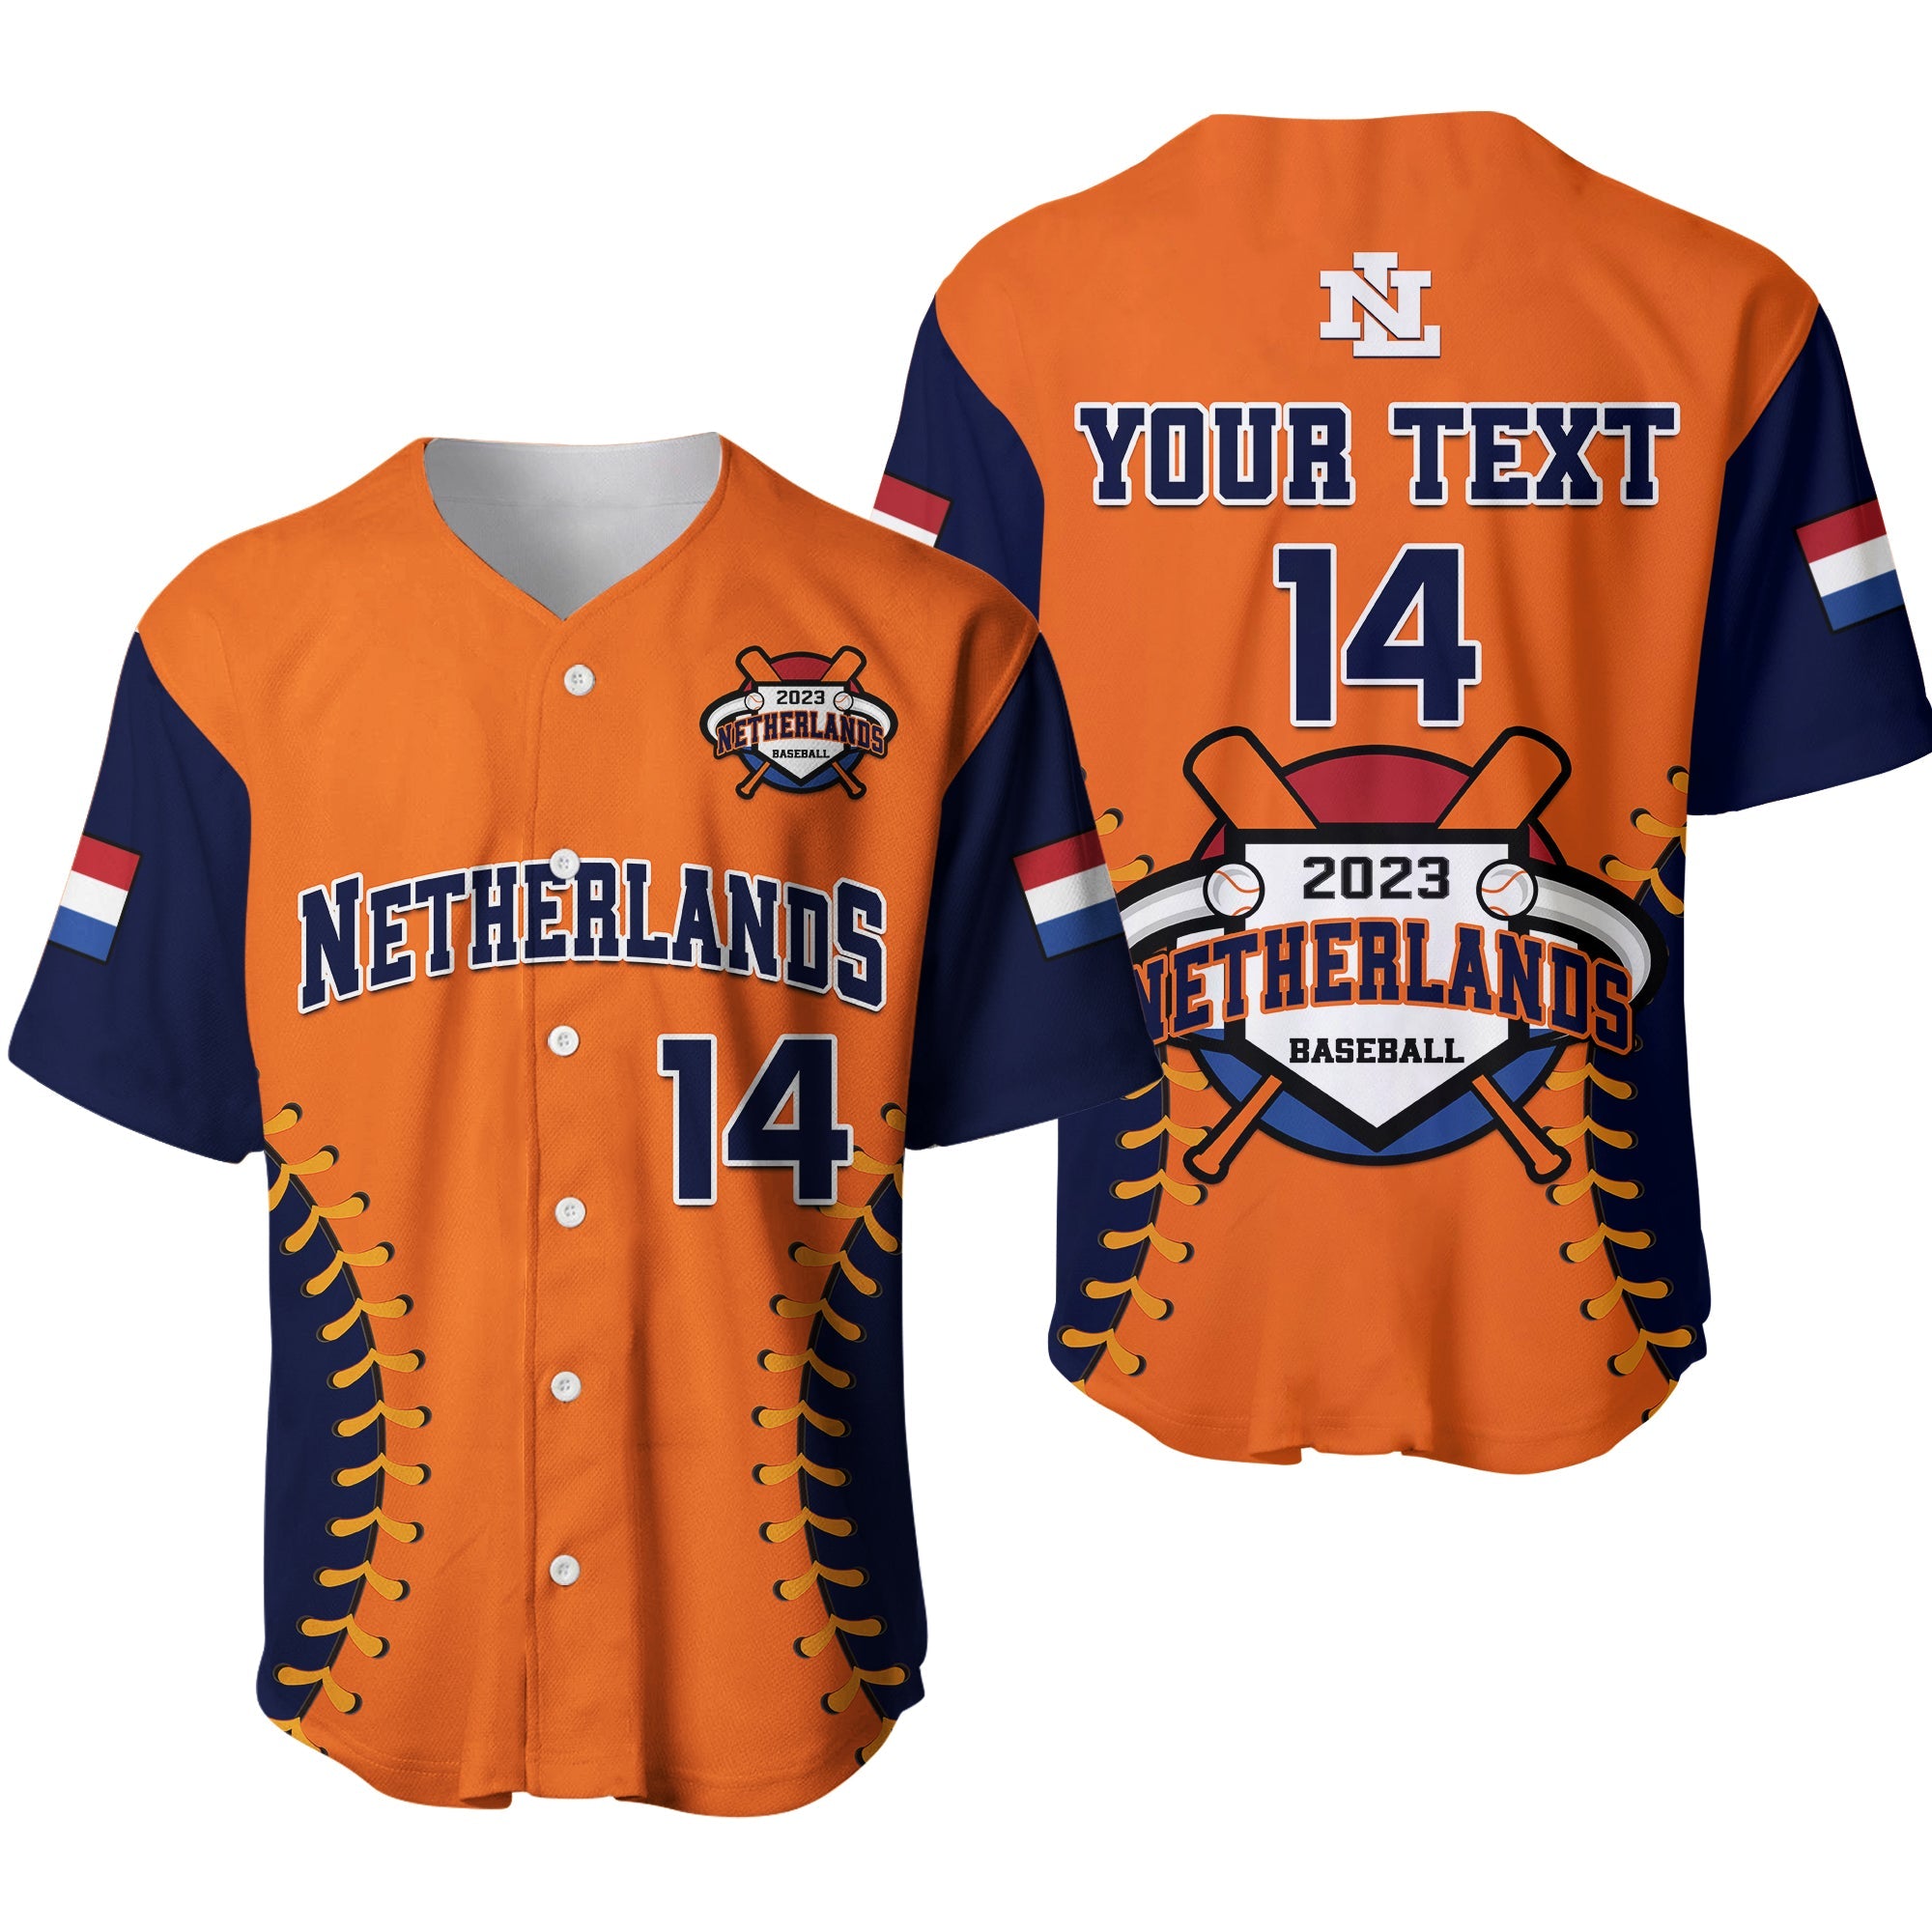 custom-text-and-number-netherlands-baseball-2023-baseball-jersey-sporty-style-ver01